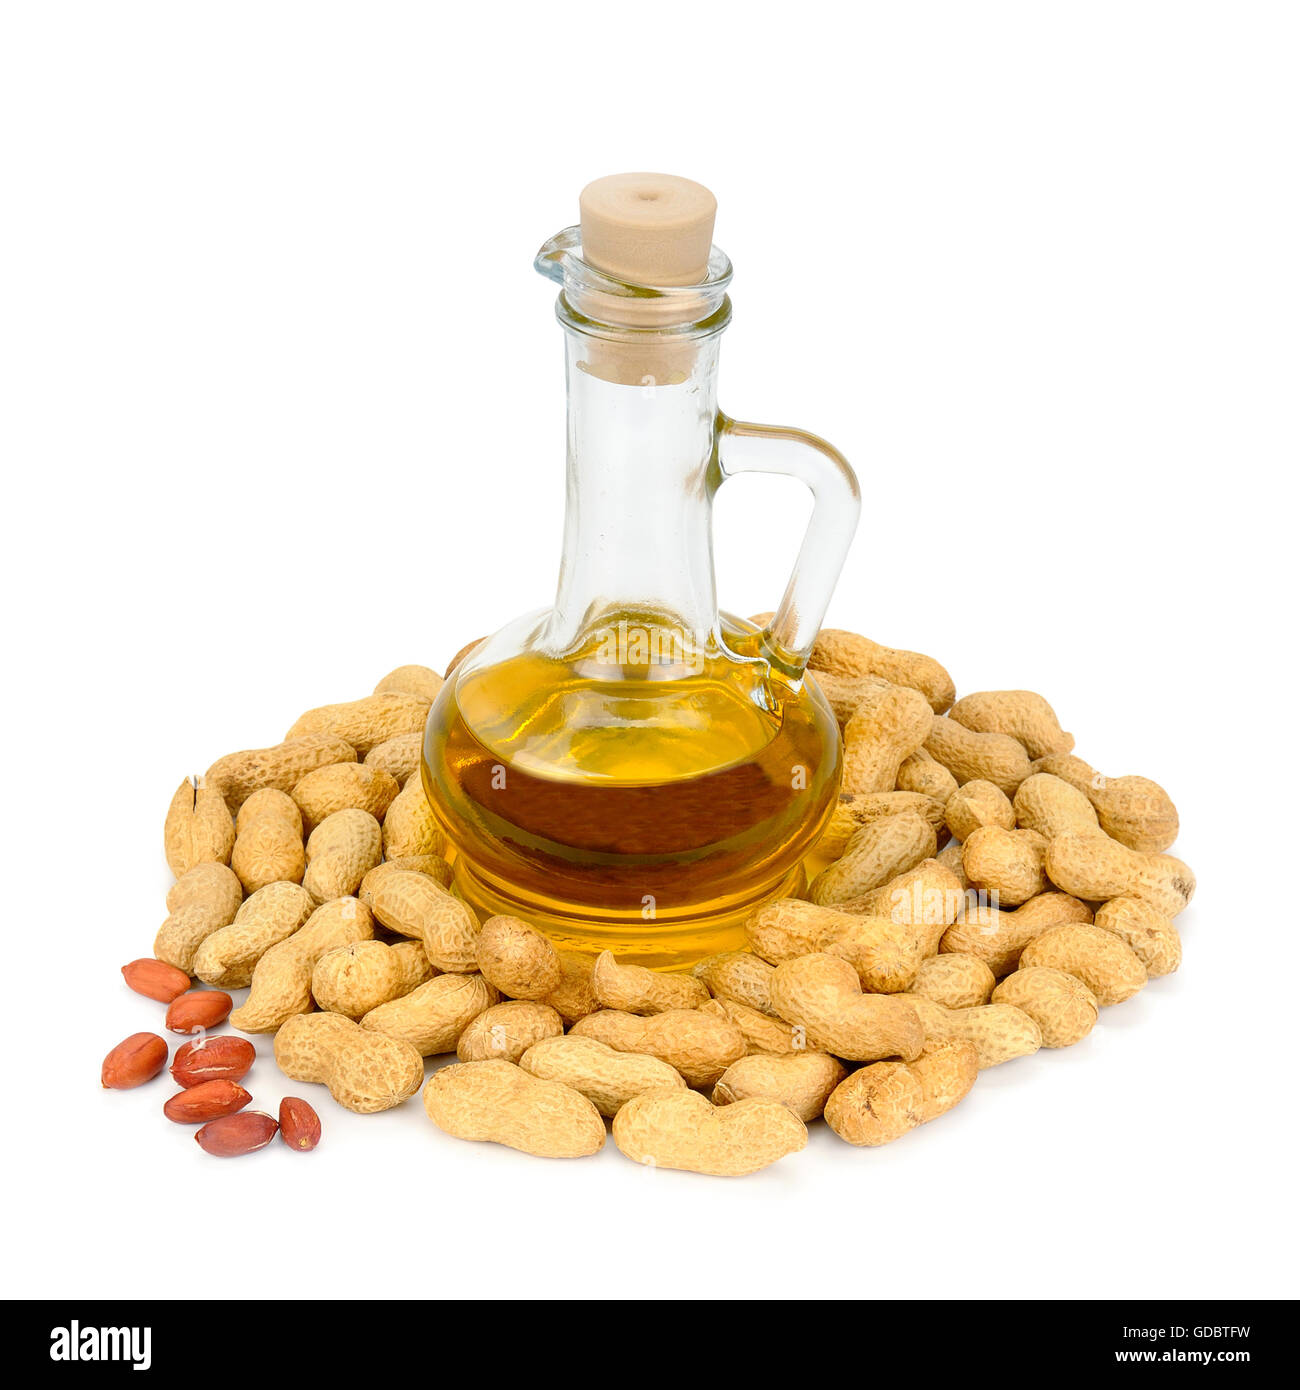 peanuts and oil in bottle isolated on white background Stock Photo